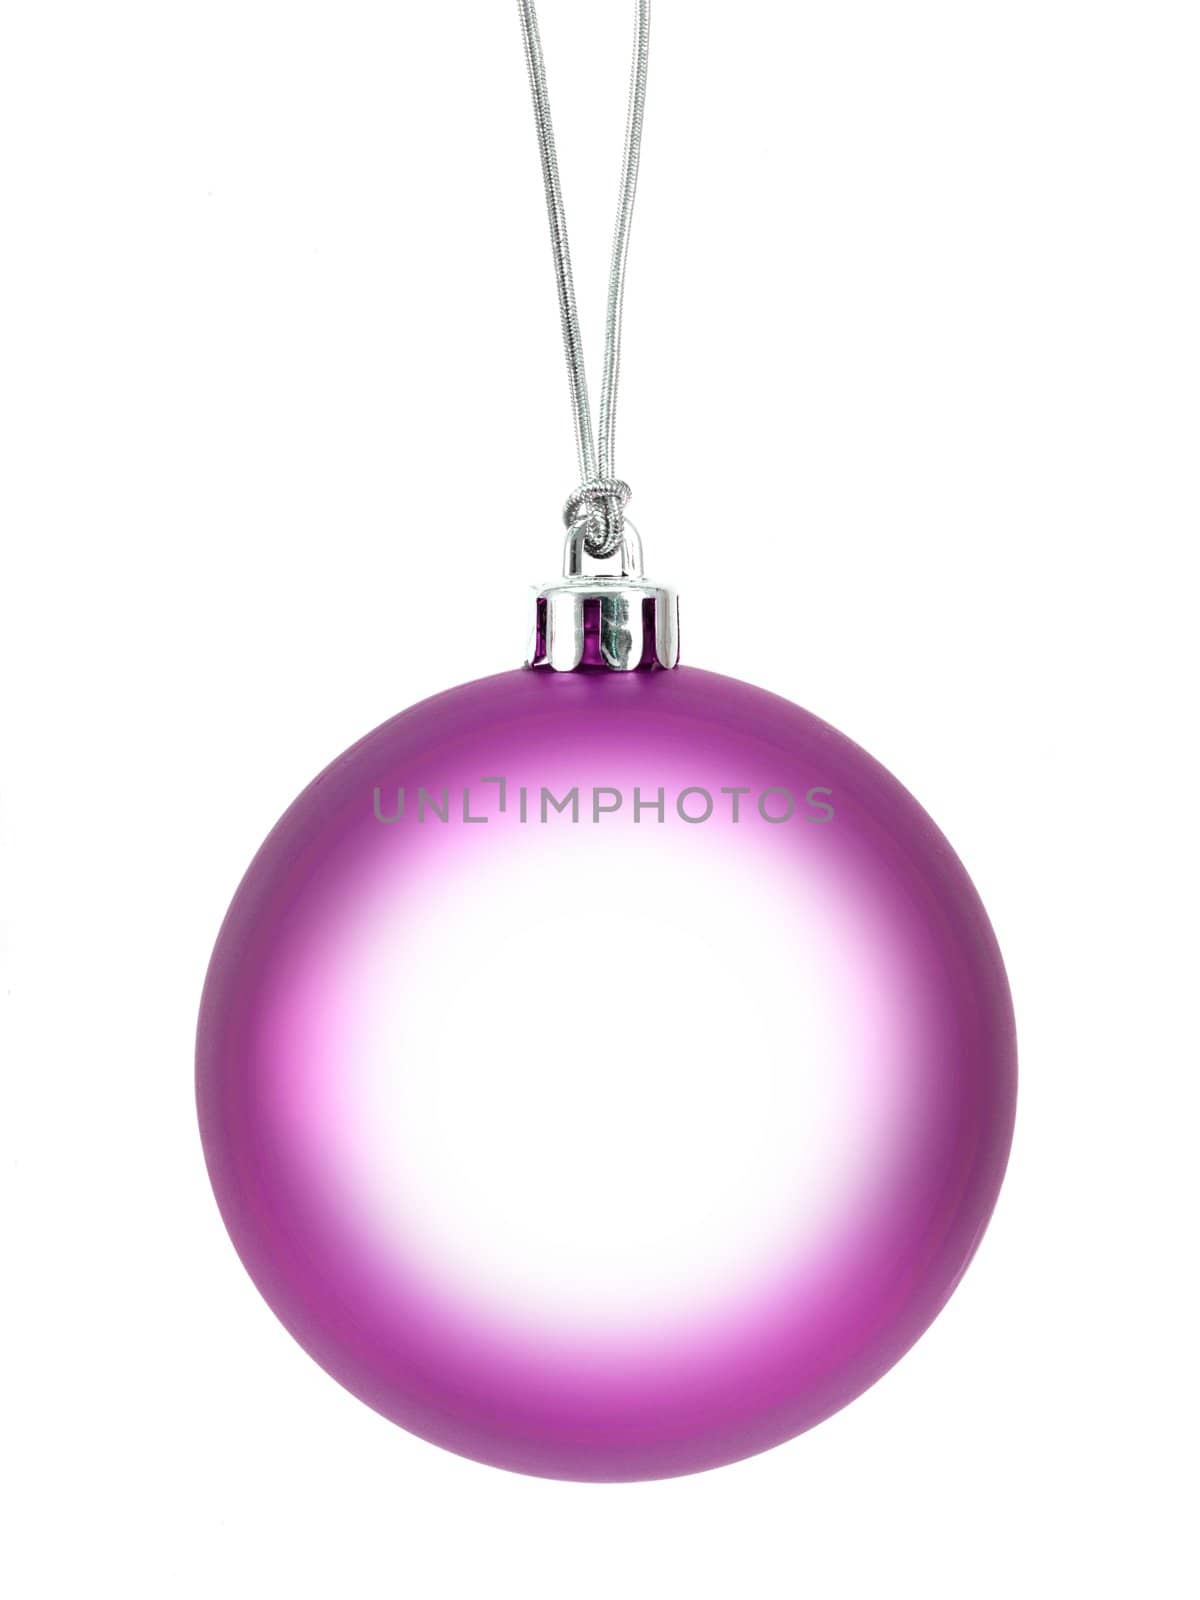 Christmas ornaments and items shot in studio